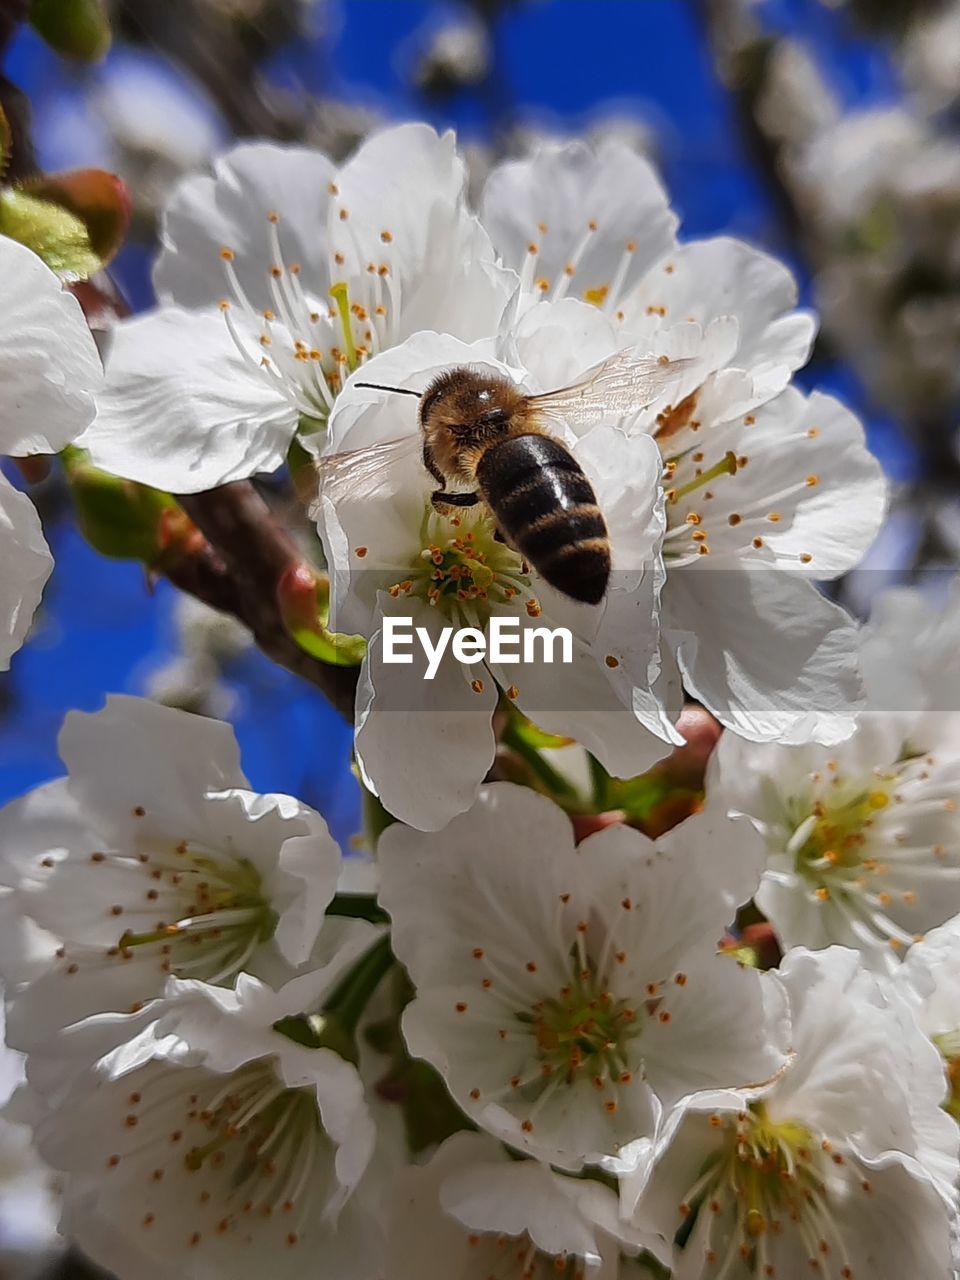 flower, flowering plant, blossom, plant, fragility, beauty in nature, freshness, bee, close-up, growth, white, spring, petal, flower head, pollen, springtime, insect, nature, branch, animal wildlife, produce, animal themes, animal, macro photography, cherry blossom, wildlife, food, no people, inflorescence, prunus spinosa, honey bee, focus on foreground, day, stamen, one animal, botany, outdoors, tree